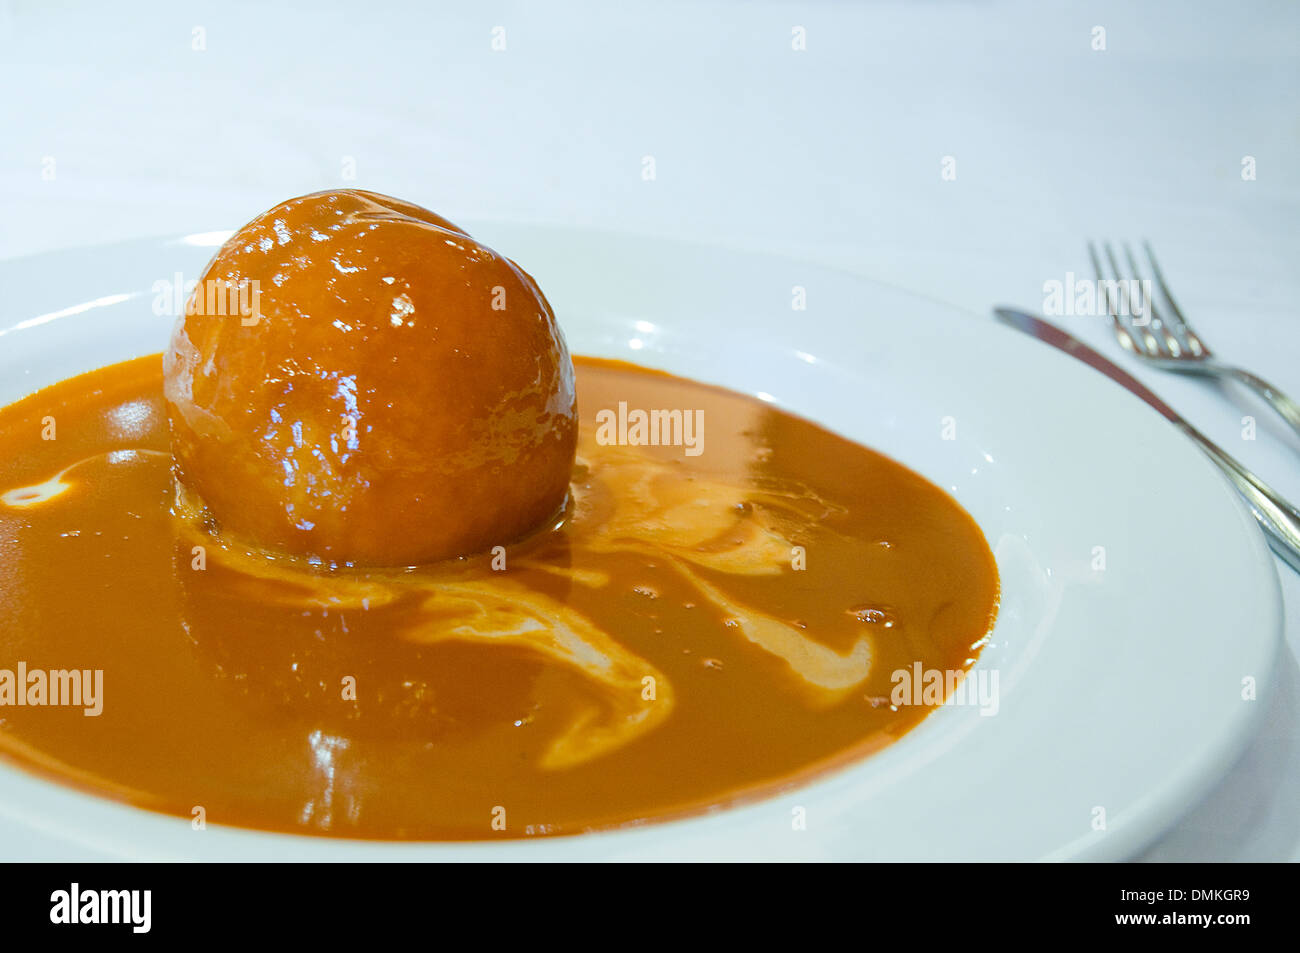 Dessert: Baked peach with toffee sauce. Close view. Stock Photo